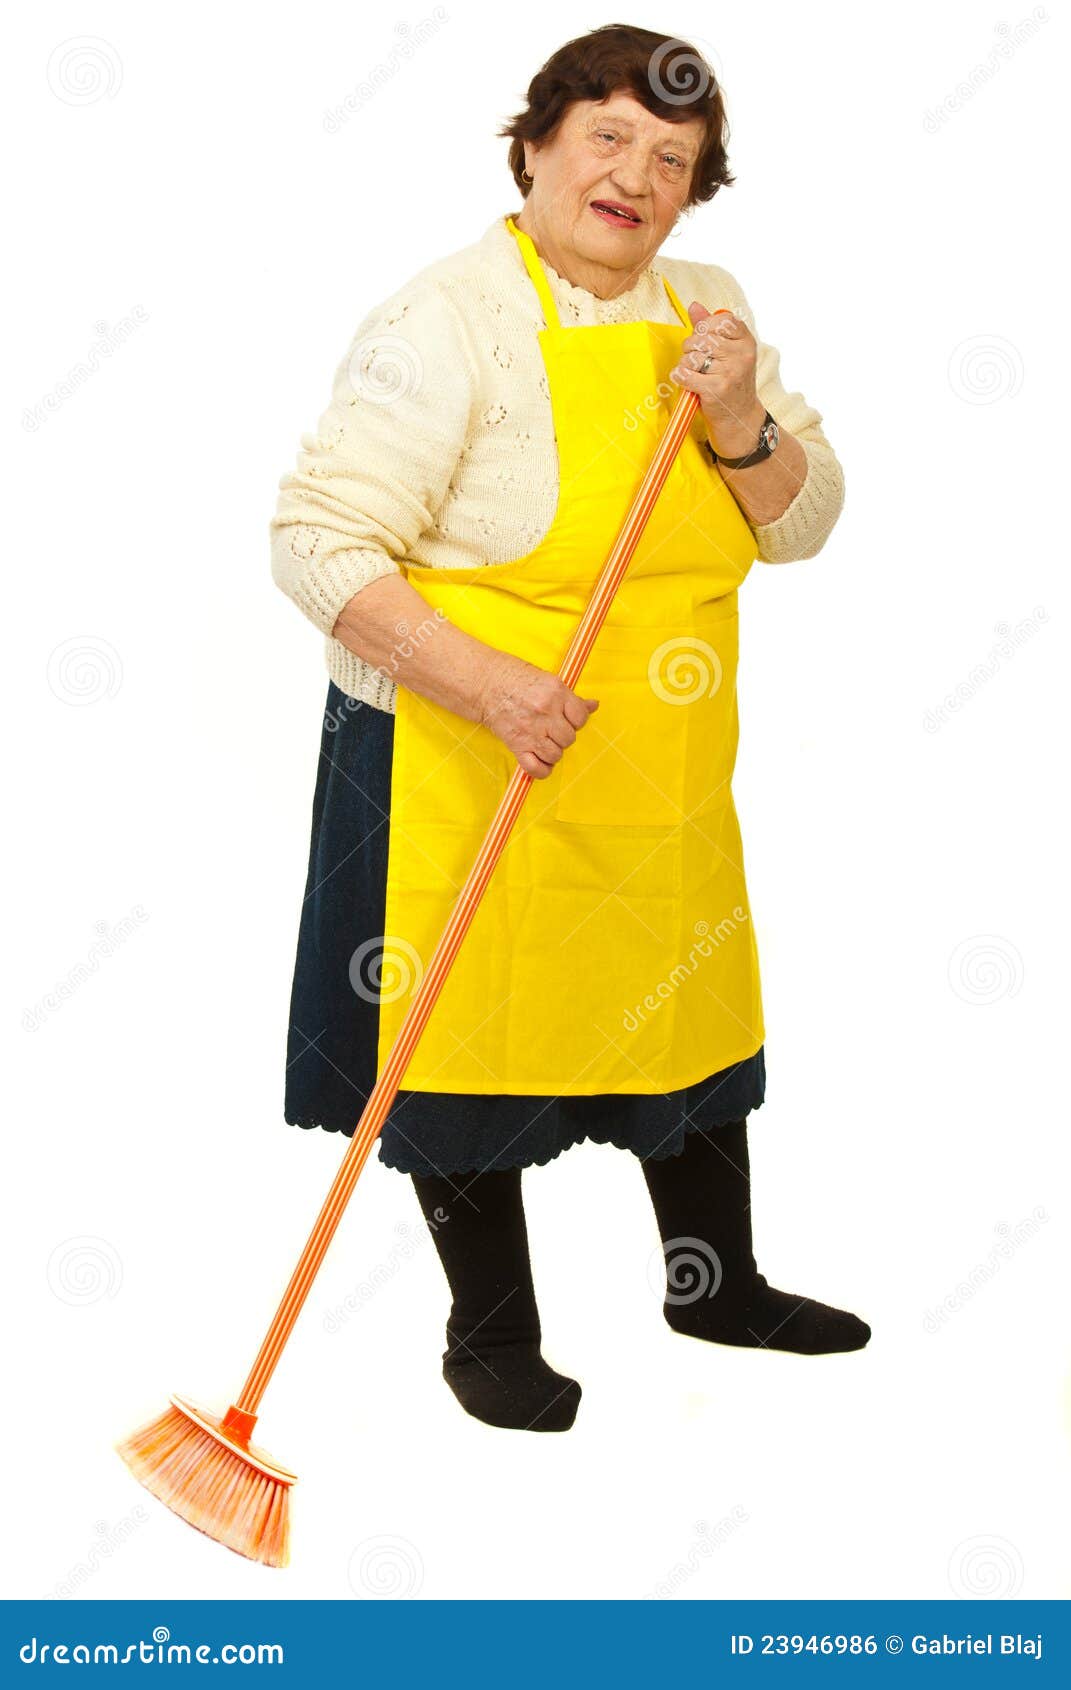 Elderly woman with broom stock photo. Image of full, aged - 23946986